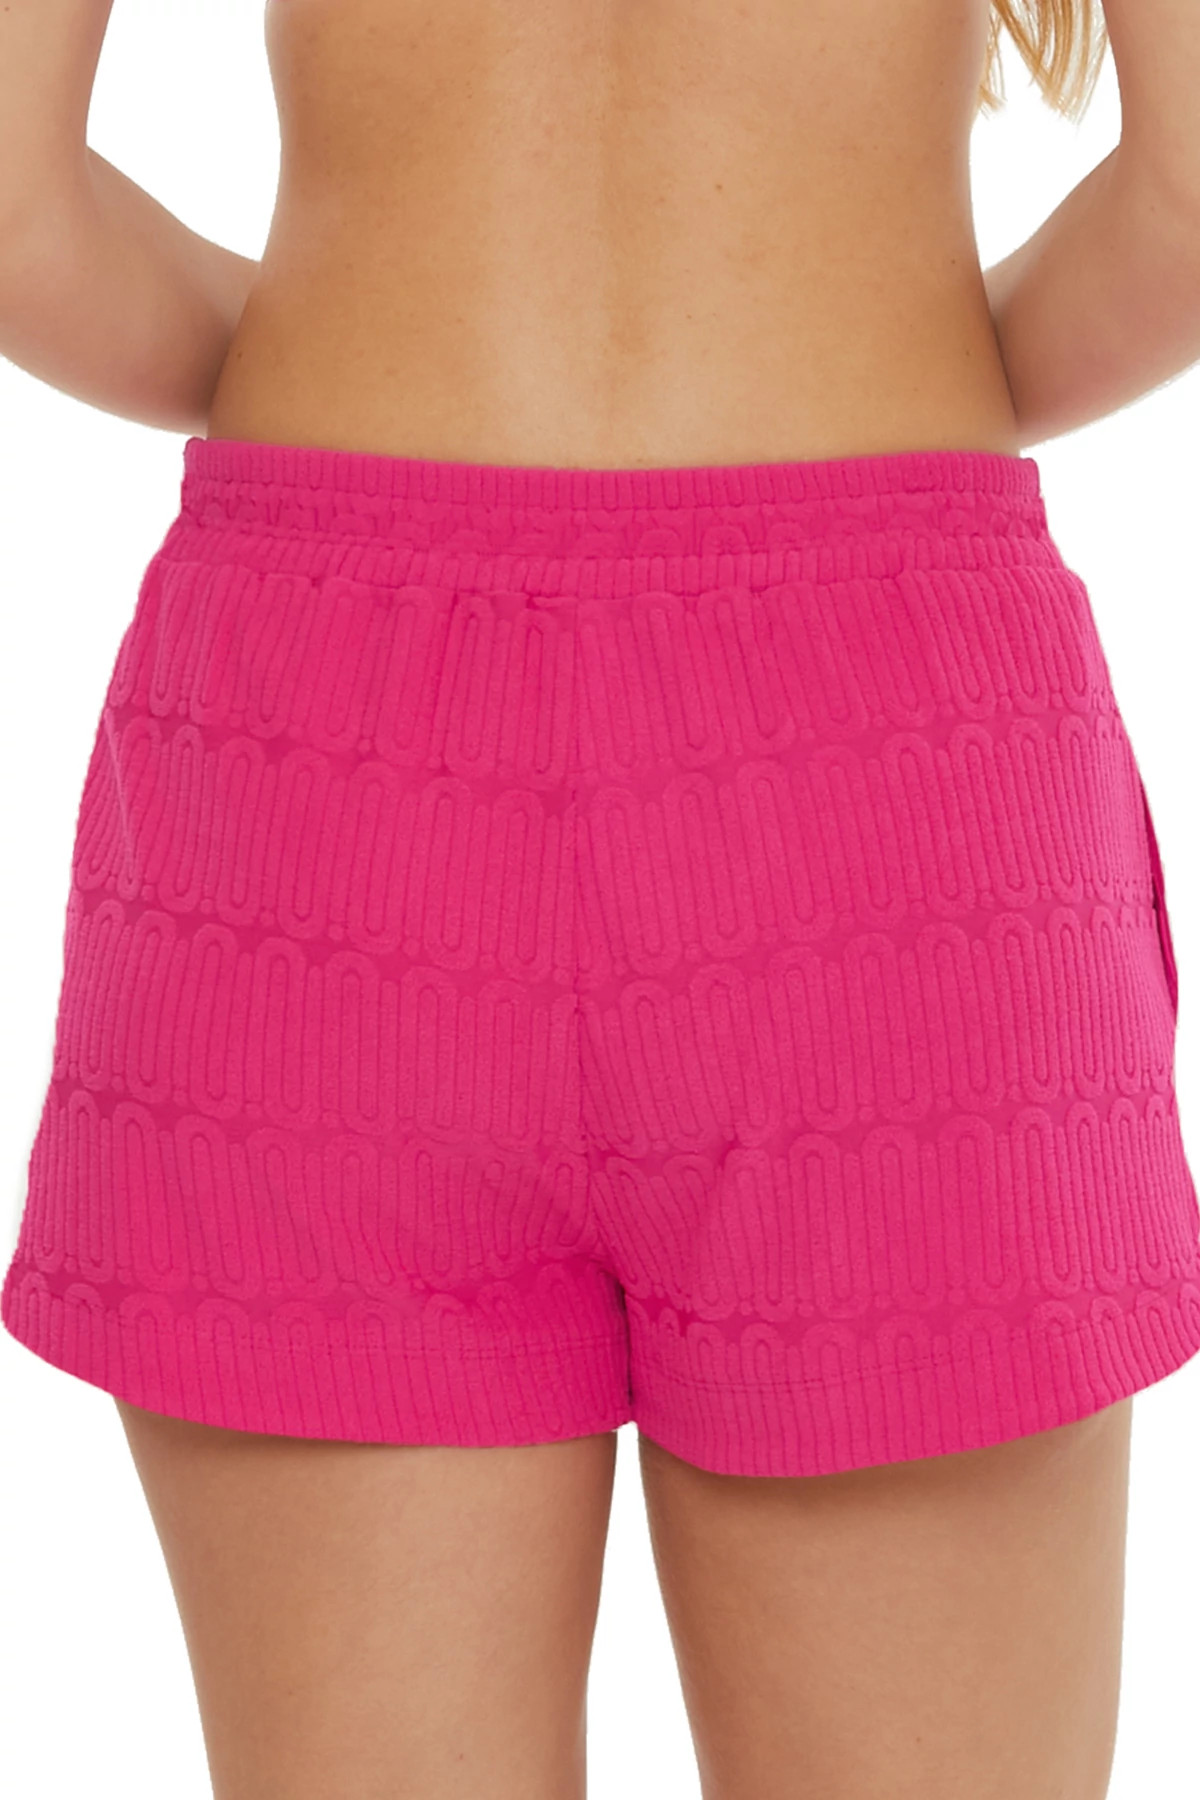 BOUGAINVILLEA Terrycloth Dolphin Shorts image number 2